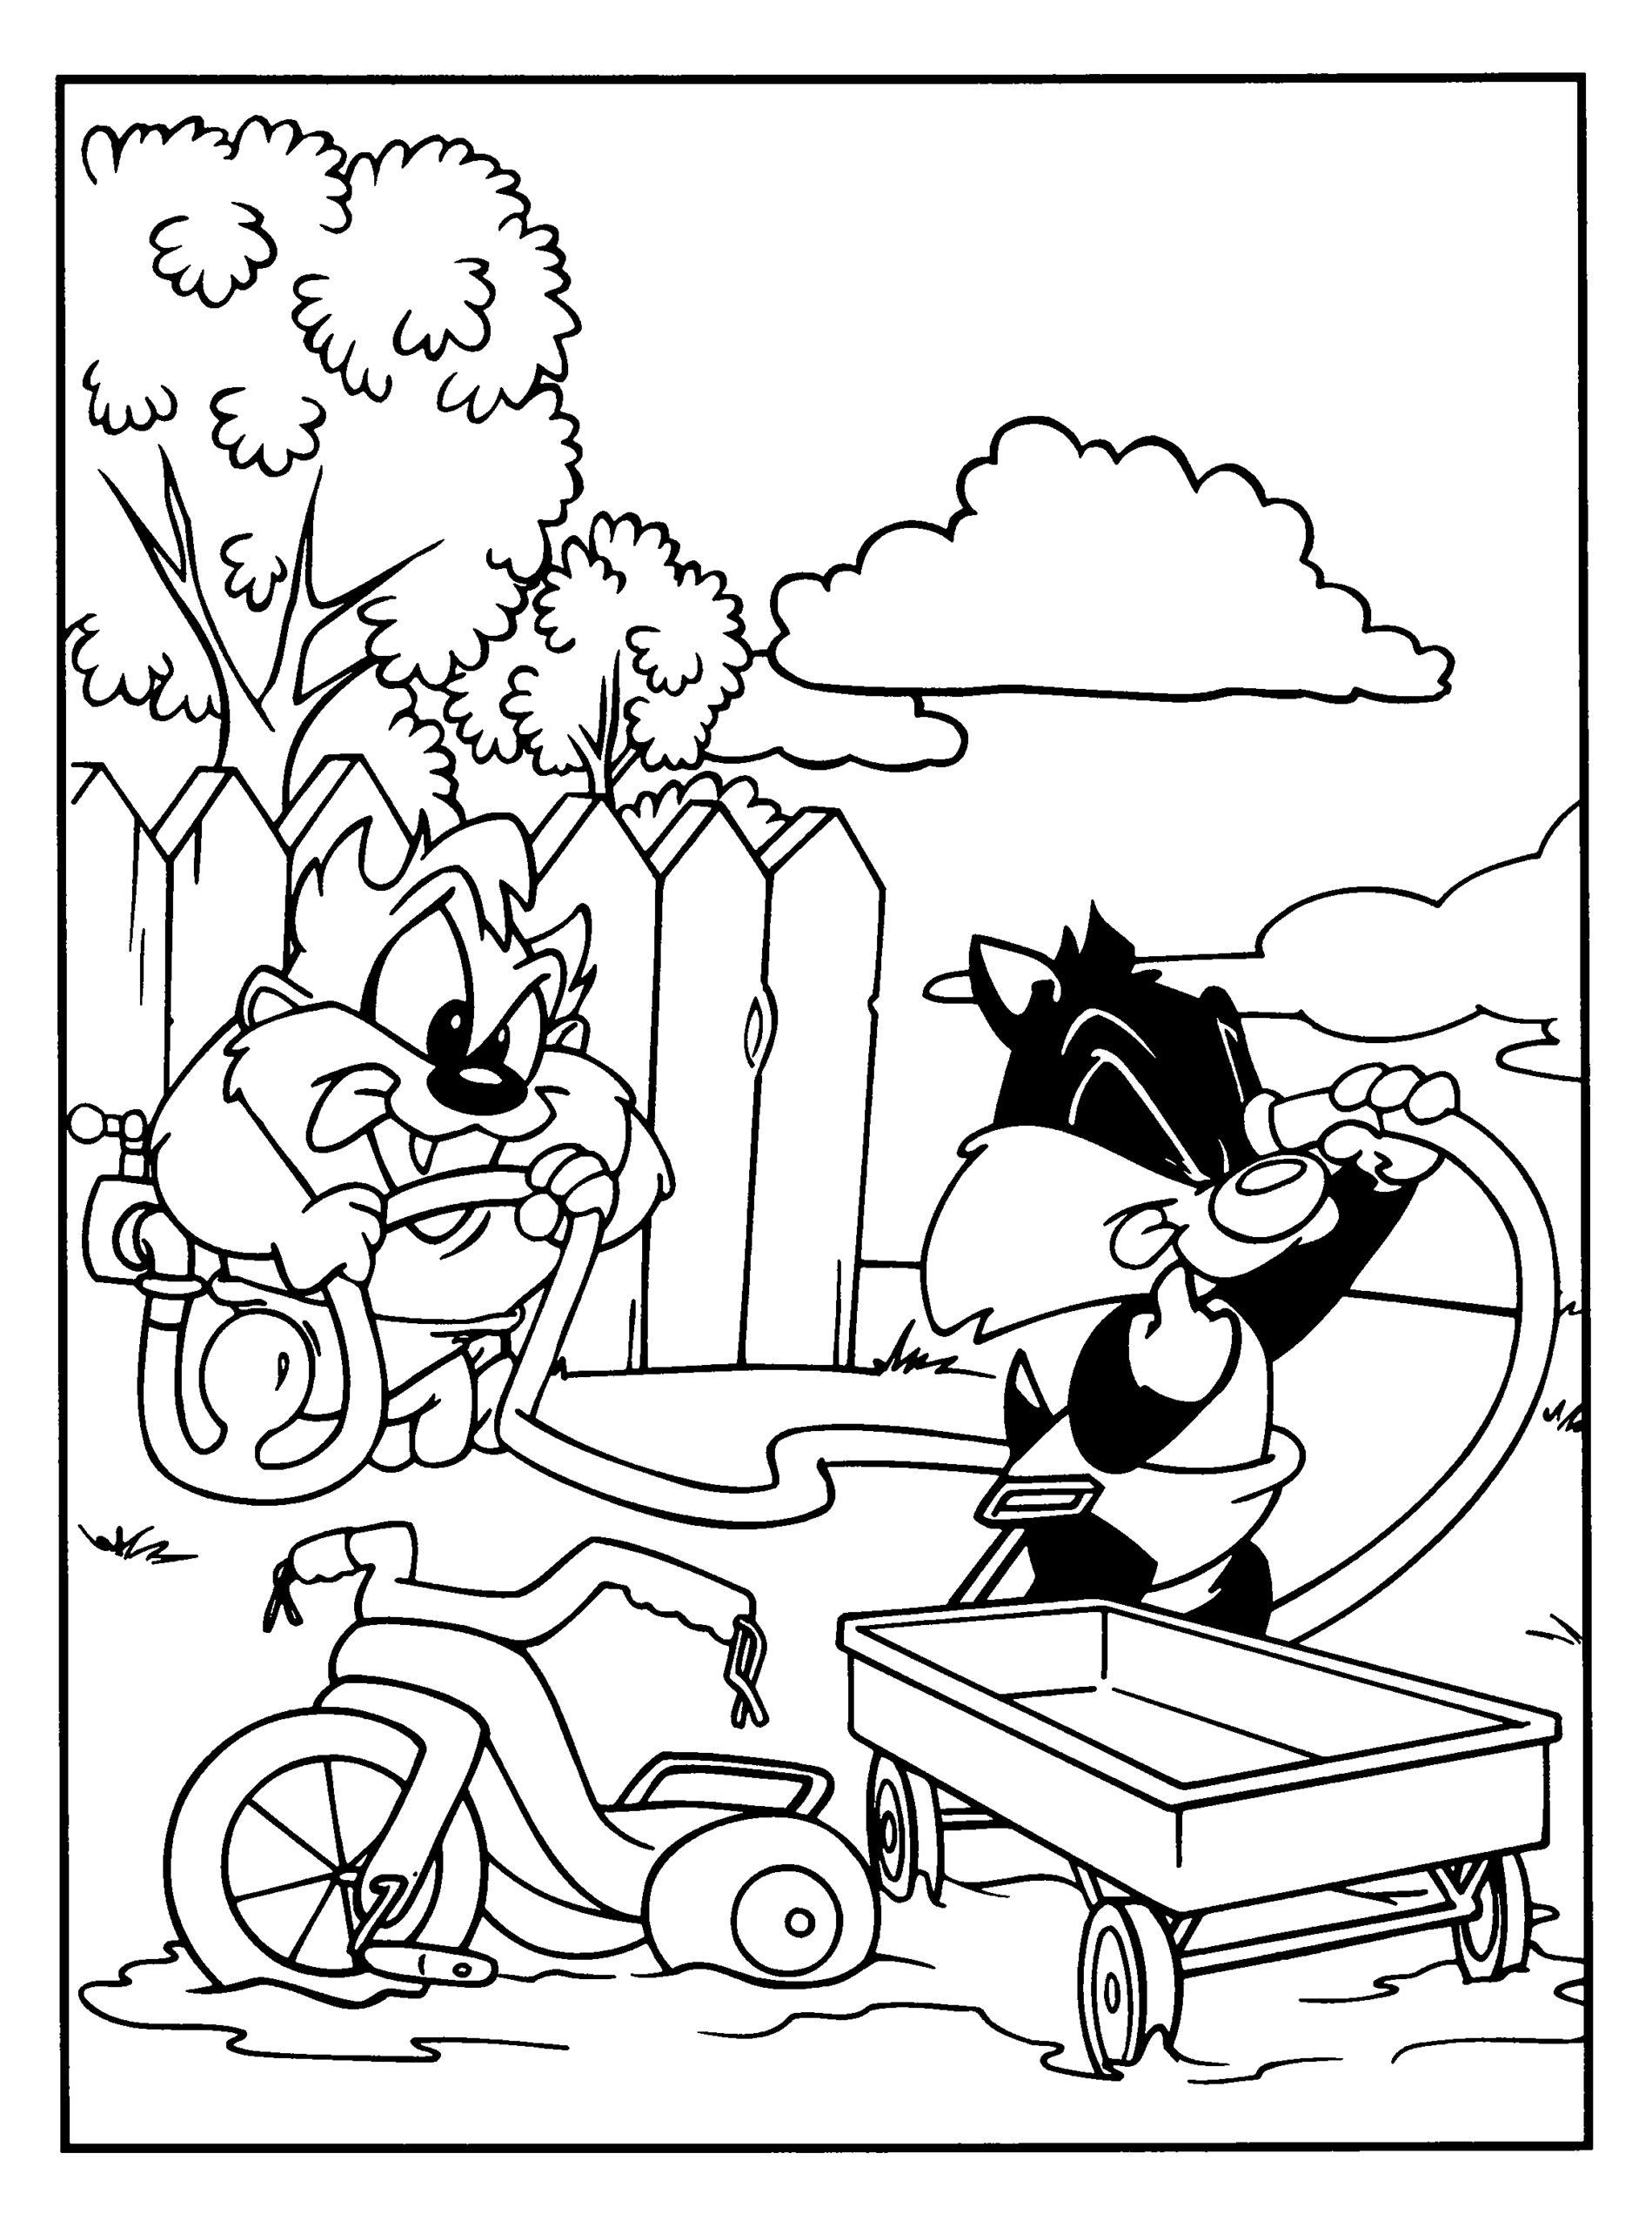 Looney Tunes Coloring Pages TV Film looney tunes 2 Printable 2020 04586 Coloring4free